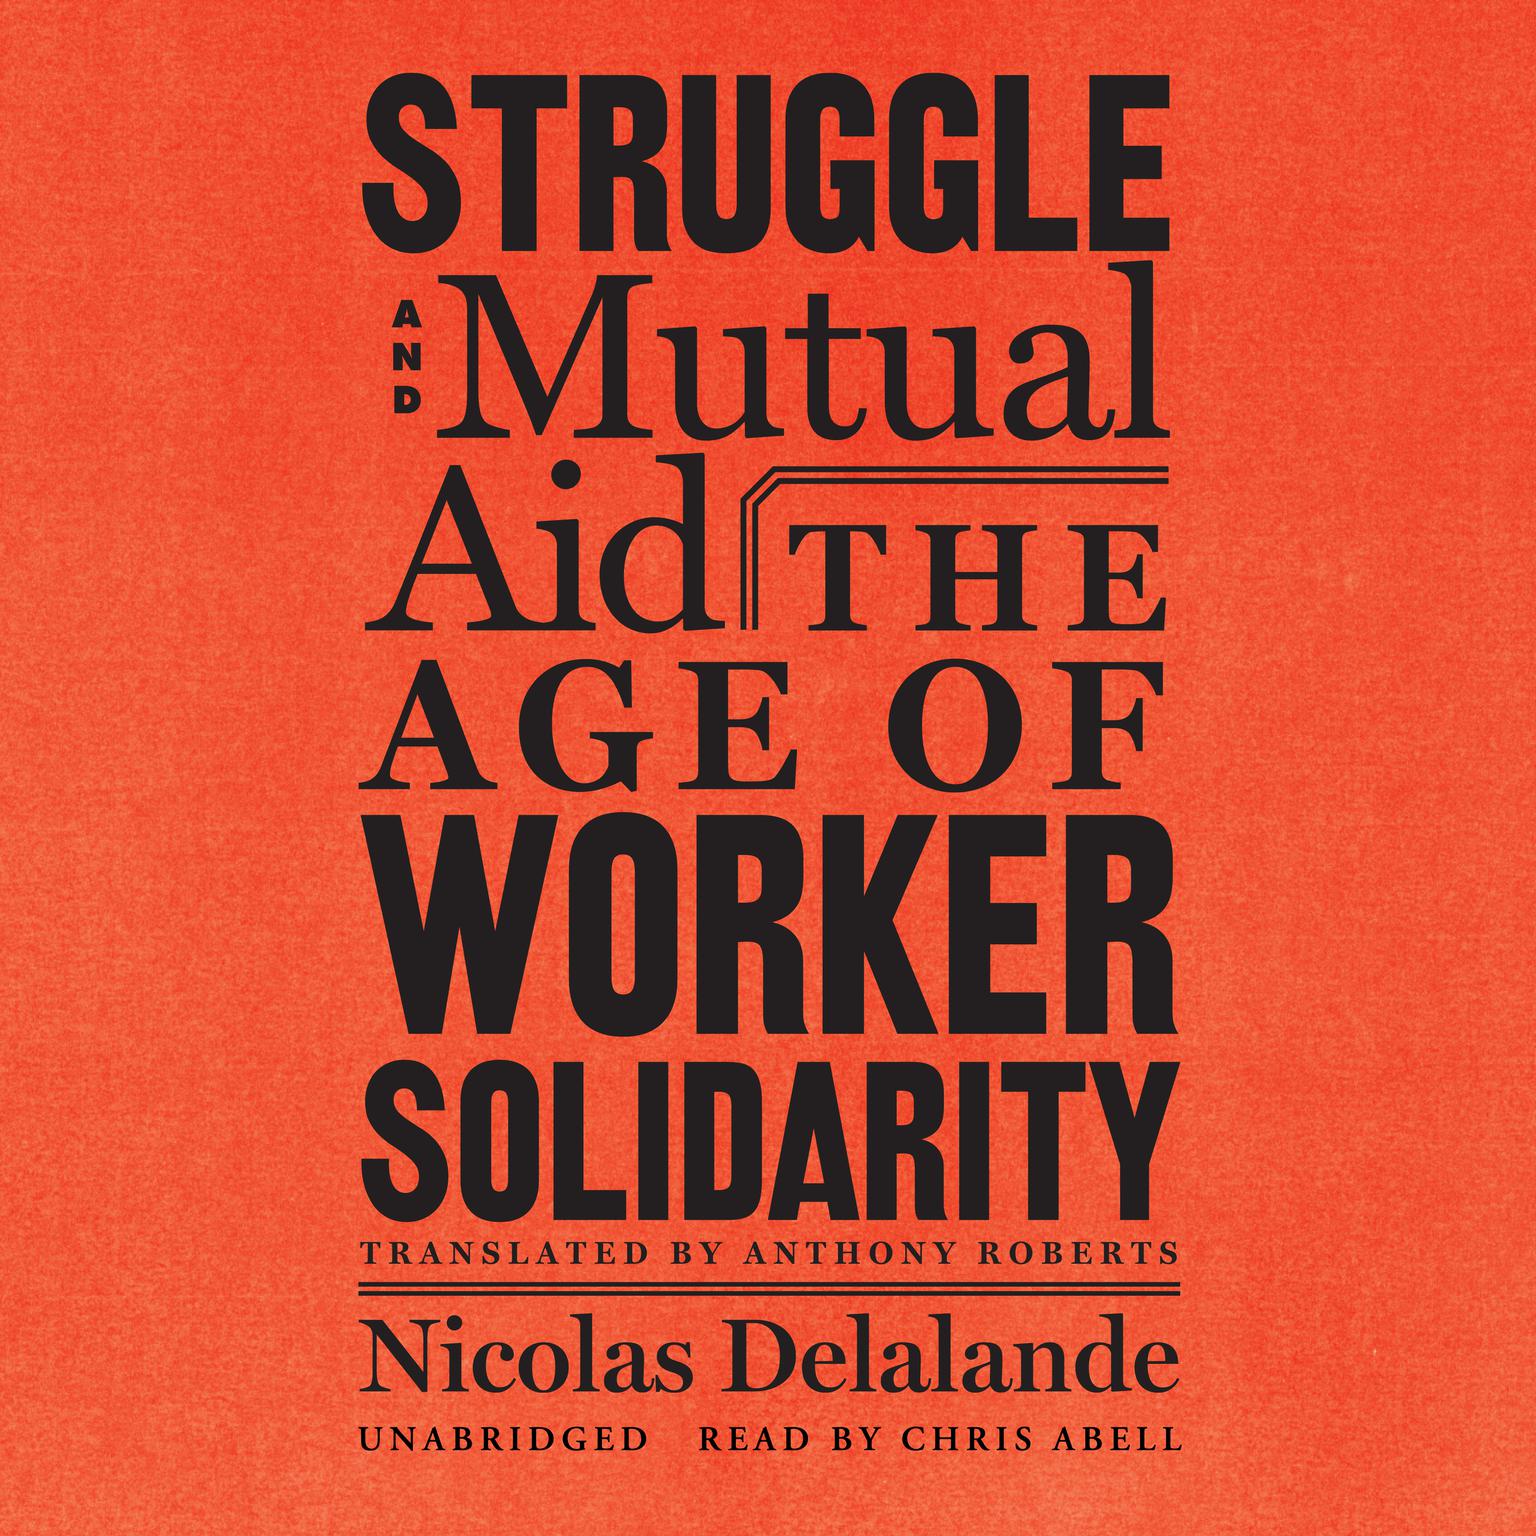 Struggle and Mutual Aid: The Age of Worker Solidarity Audiobook, by Nicolas Delalande